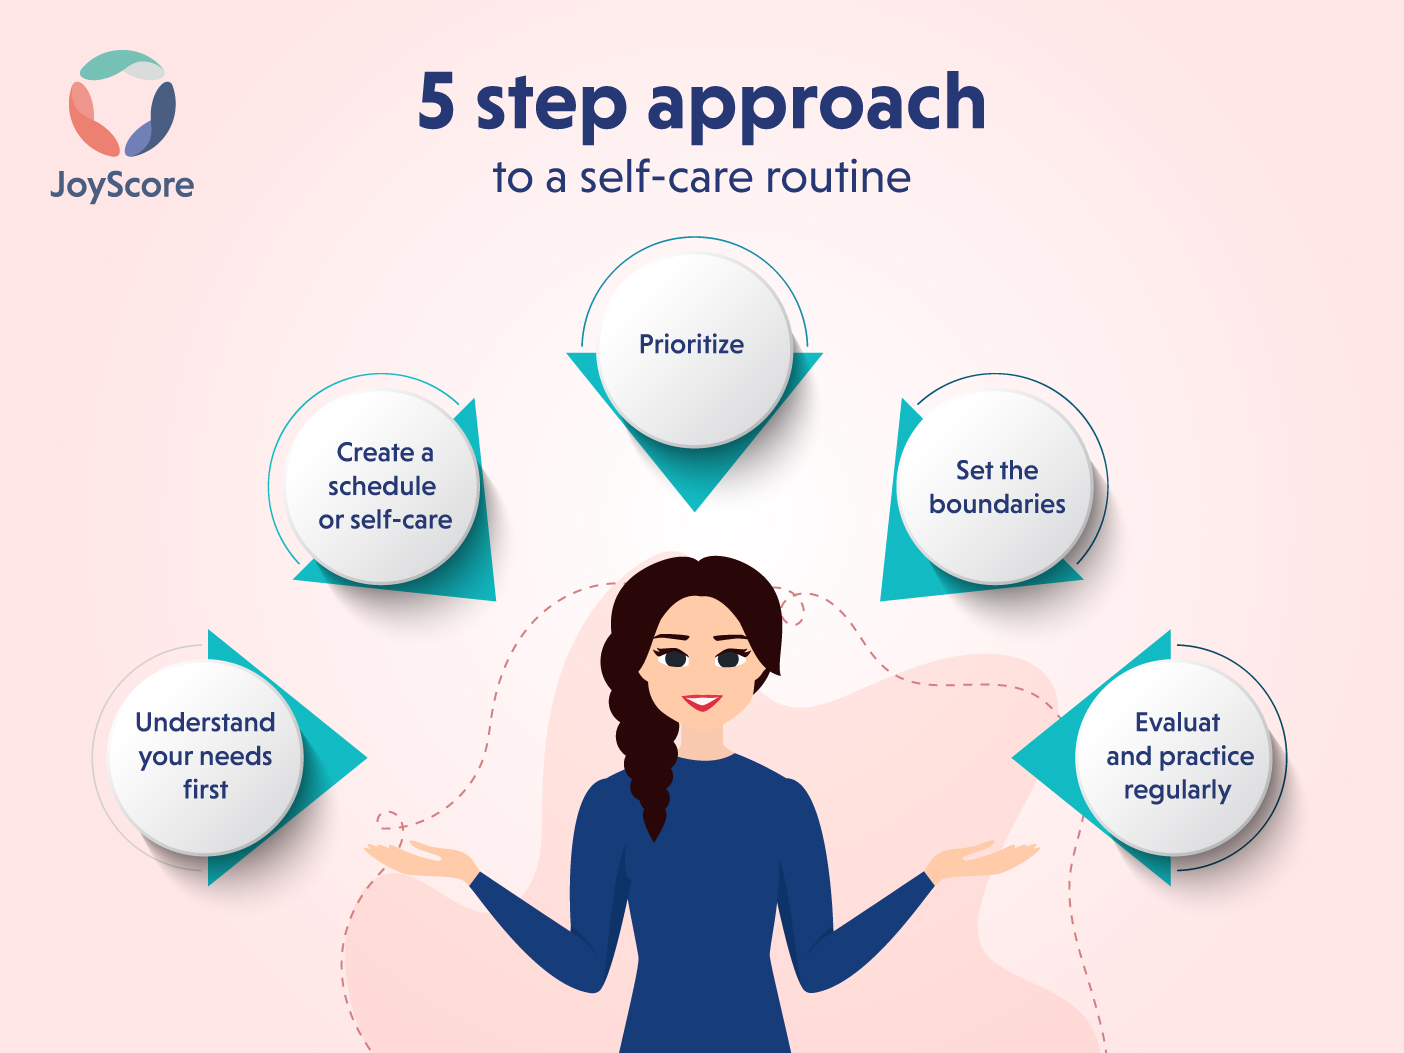 5 step approach to a self-care routine